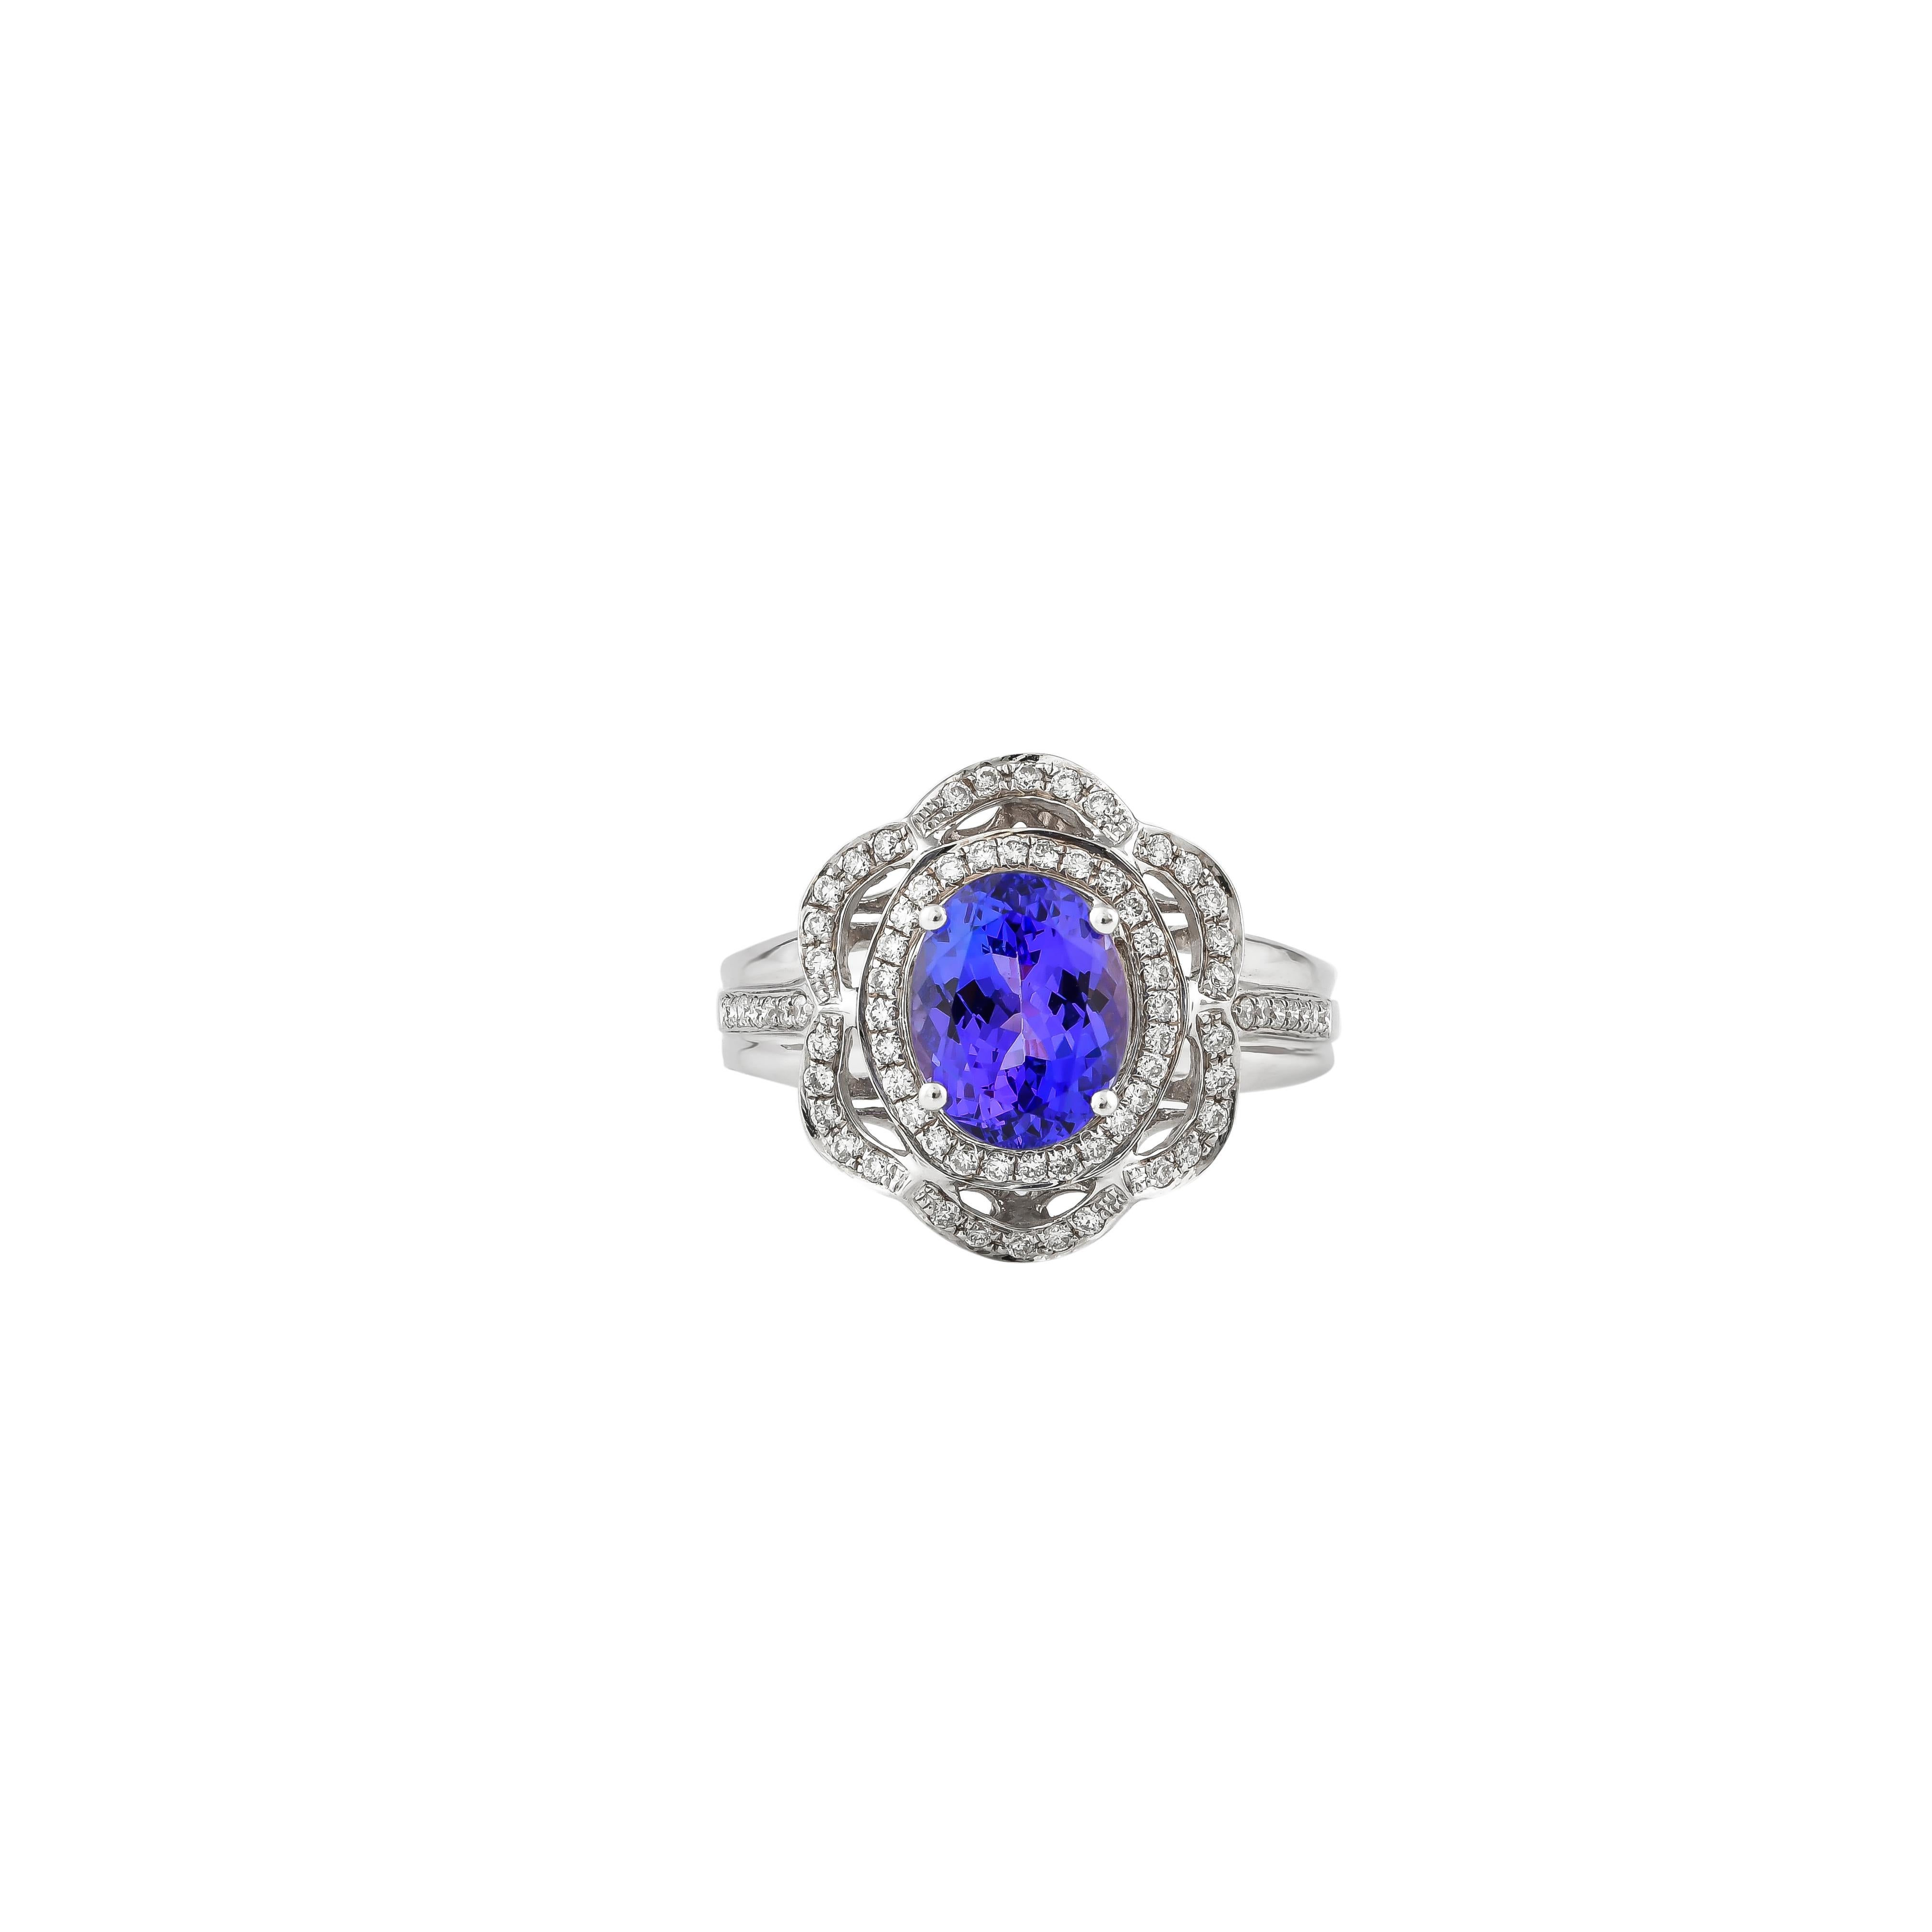 Contemporary 2.34 Carat Tanzanite Ring in 18 Karat White Gold with Diamond. For Sale